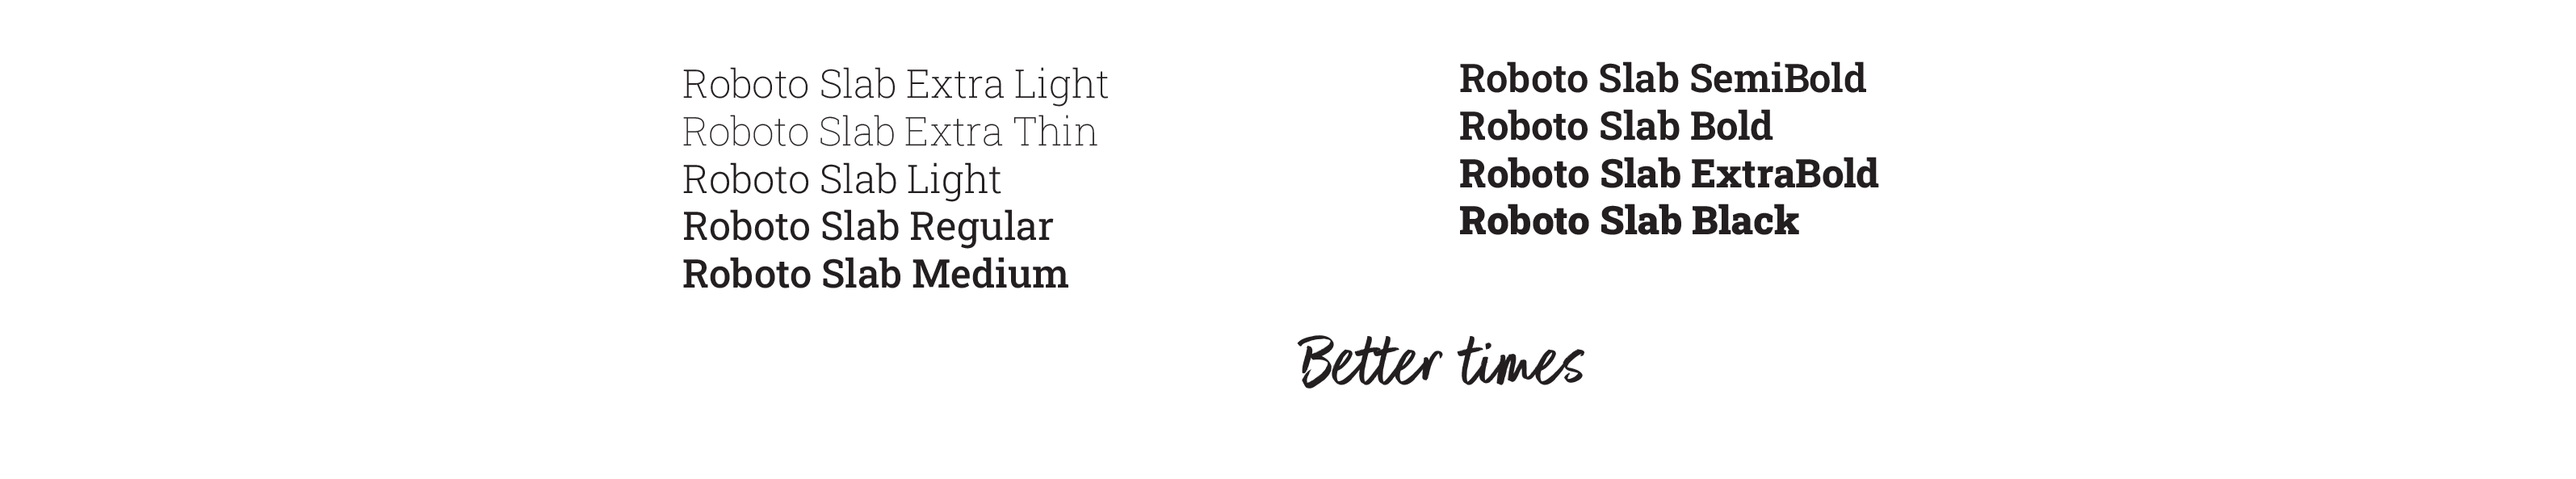 CompTIA-Spark-Brand_fonts_Roboto-Better times